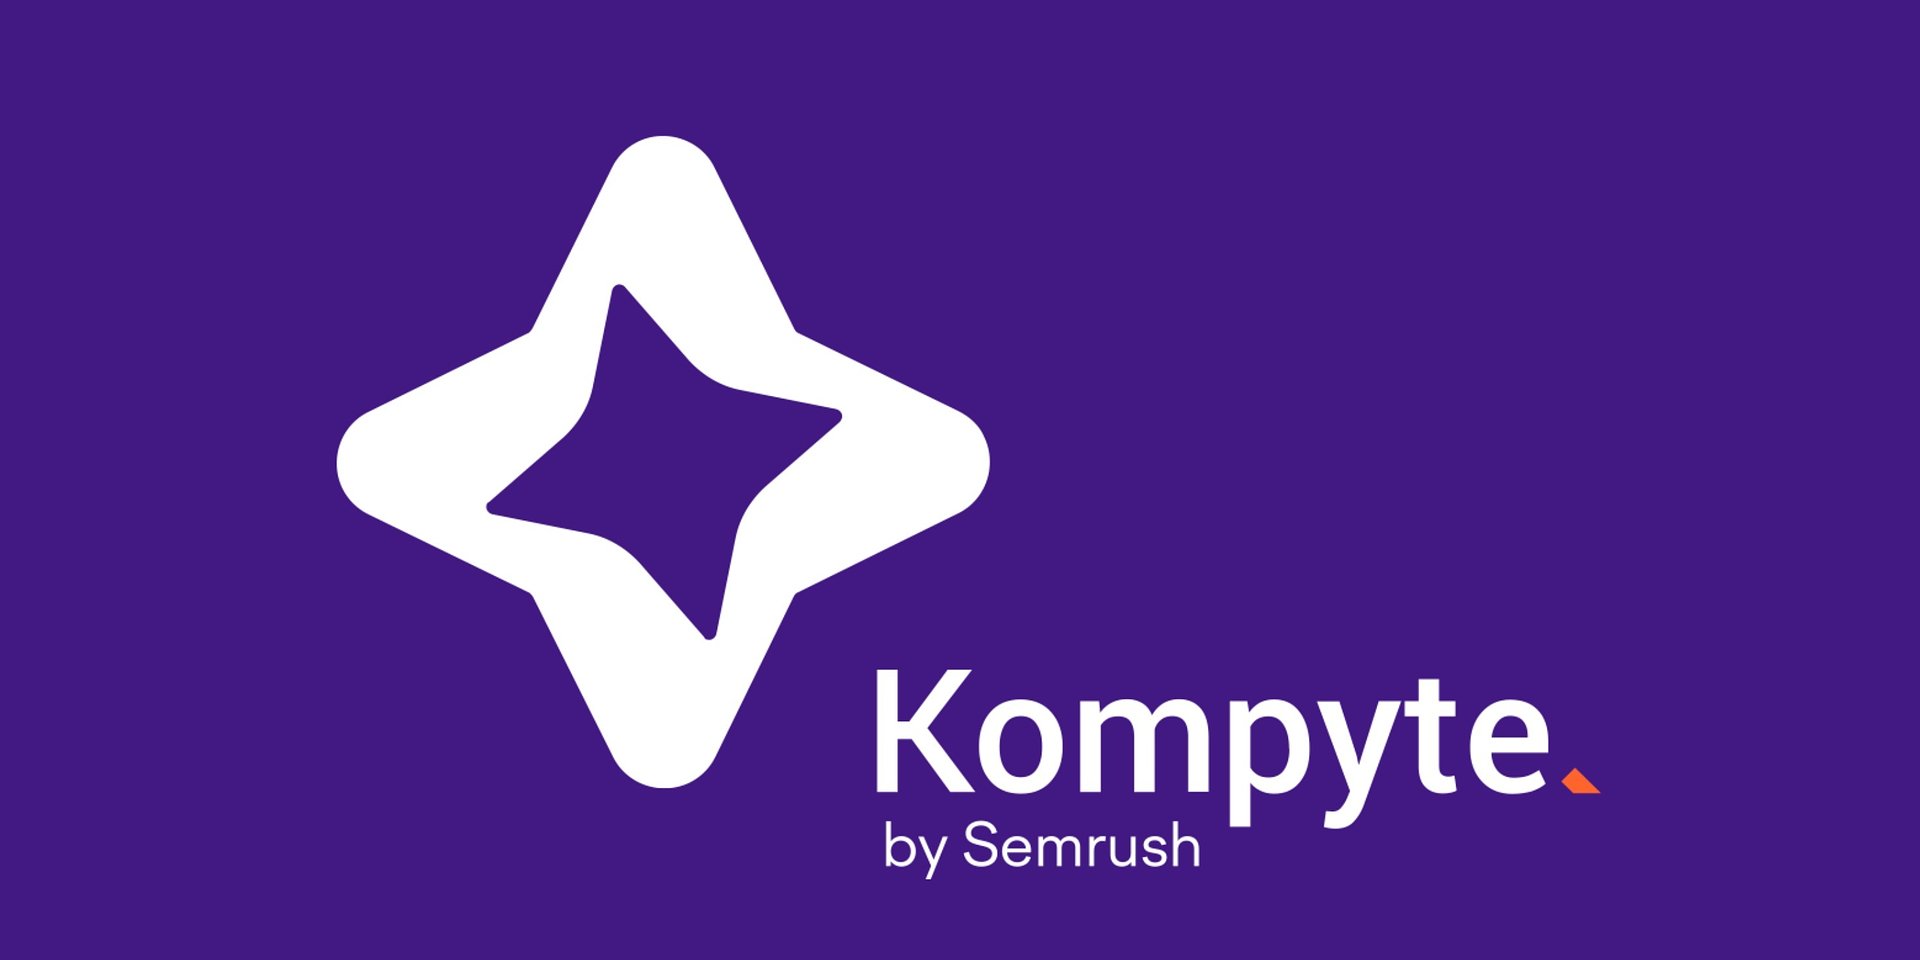 Semrush Introduces Kompyte GPT: A Breakthrough in Competitive Intelligence Powered by AI